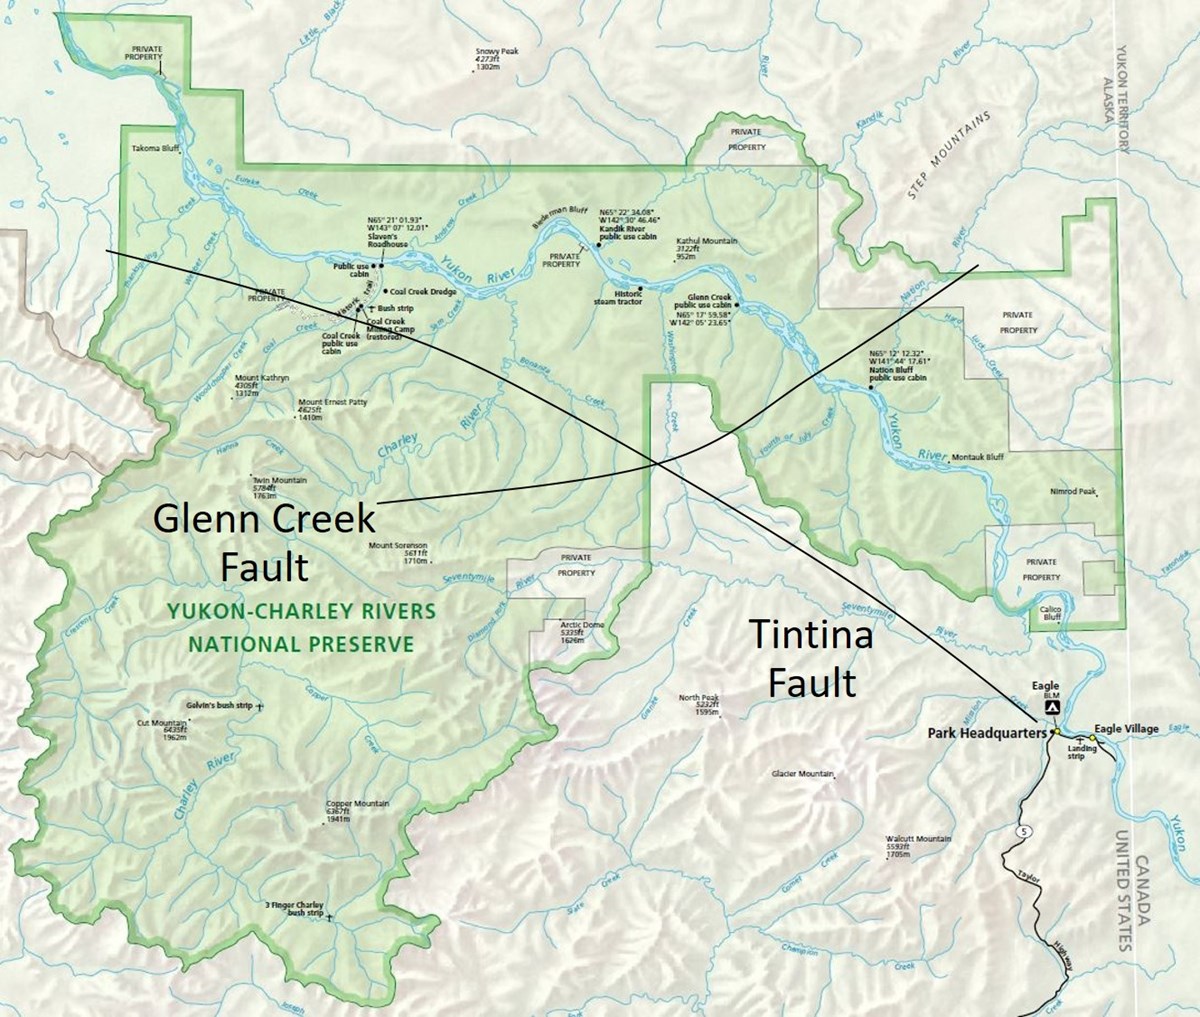 Yukon-Charley Rivers map with fault lines overlaid